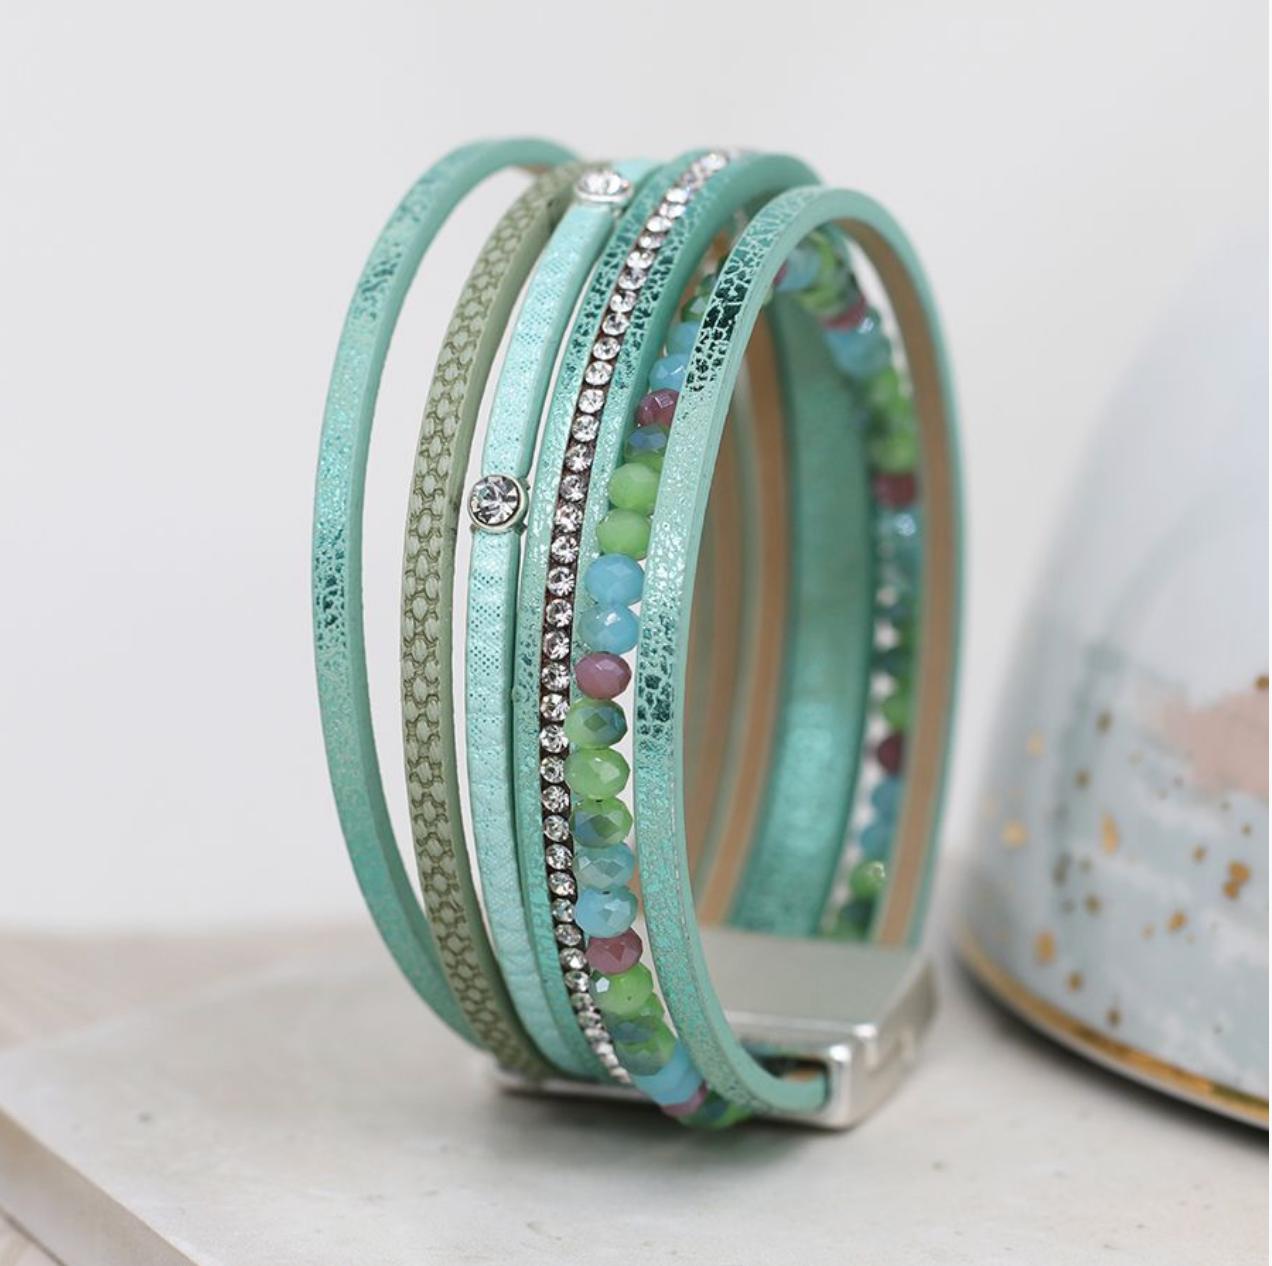 Aqua leather bracelet with mixed beads and crystals